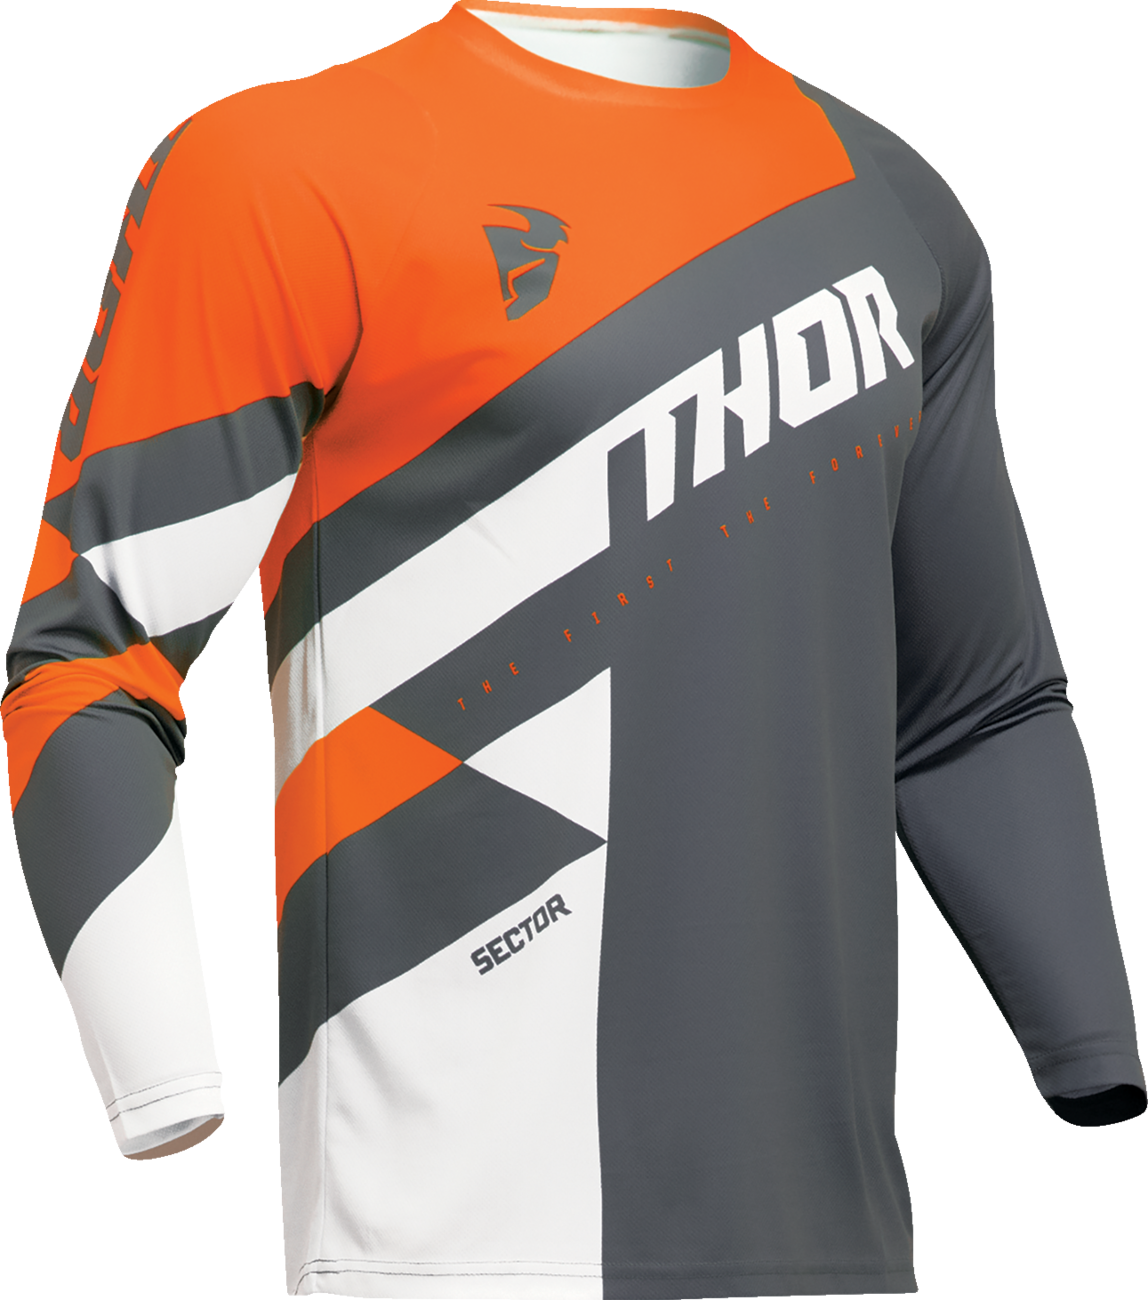 THOR Youth Sector Checker Jersey - Charcoal/Orange - Small 2912-2414